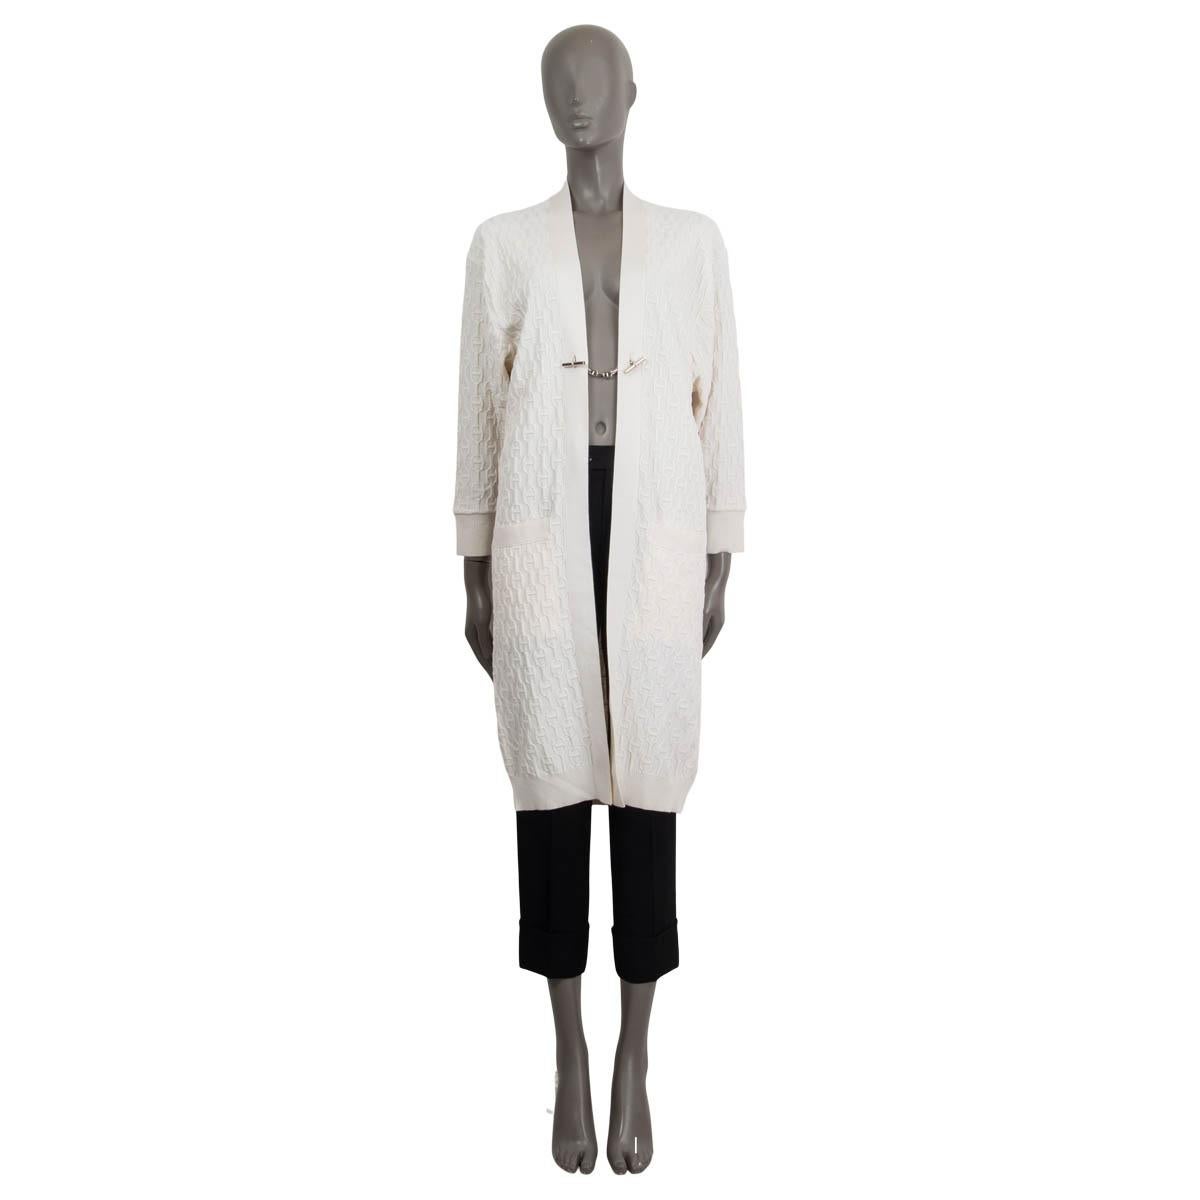 100% authentic Hermès long-cut cardigan in off-white cashmere (48%), silk (47%) and polyurethane (1%). Embellished with 'Chaines d`Ancres' embroidery all over the cardigan. Opens with a silver 'Chaines d'Ancres' chain on the front. Unlined. Has been